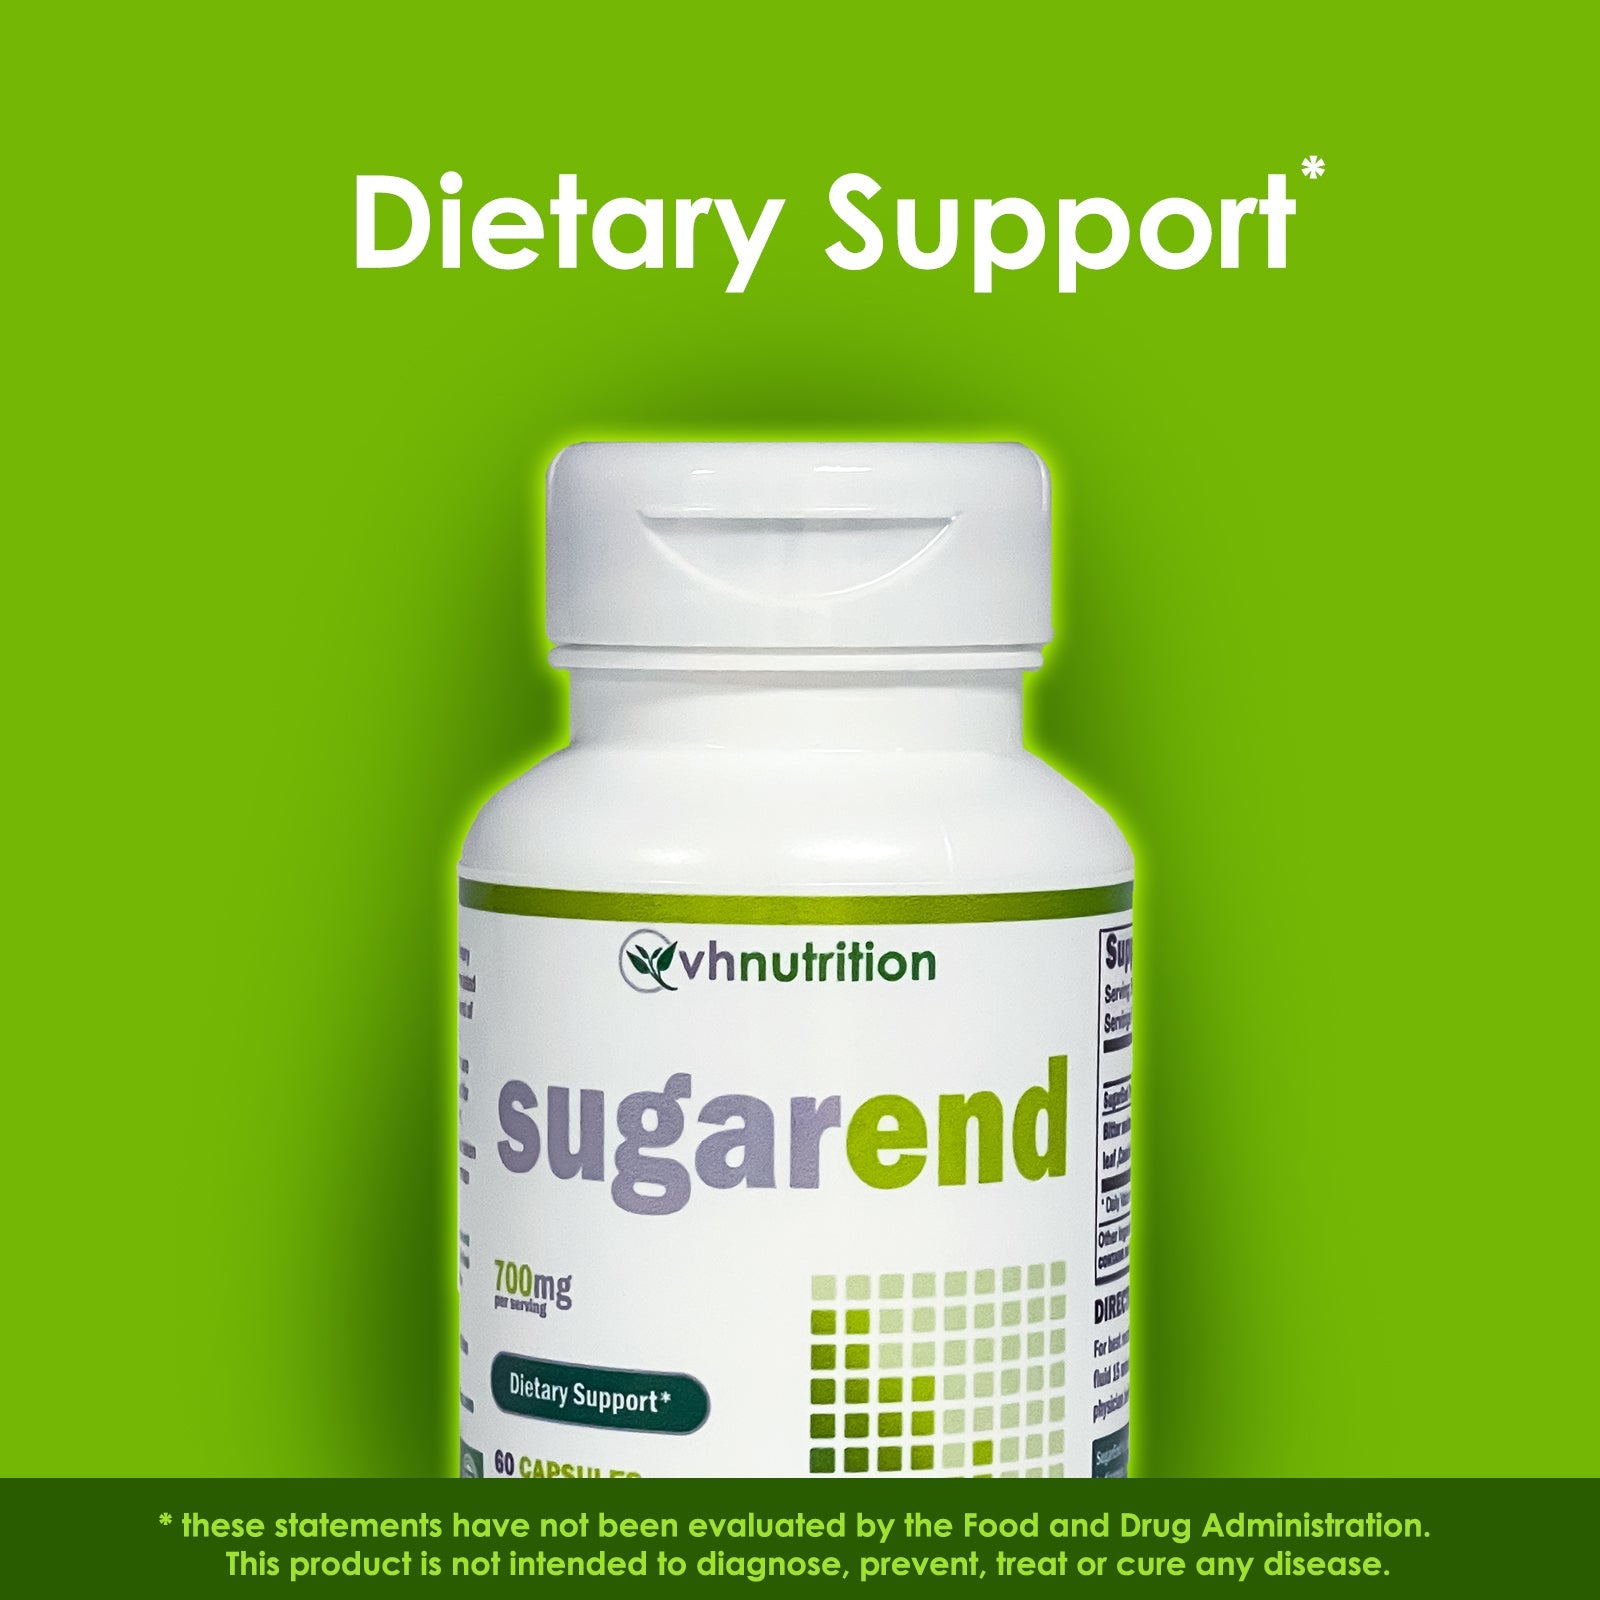 VH Nutrition SUGEREND | Dietary Support Supplement* | Circulatory Support* | Bitter Melon, White Kidney Bean Extract, Cassia Cinnamon |700mg Proprietary Formula | 60 Capsules